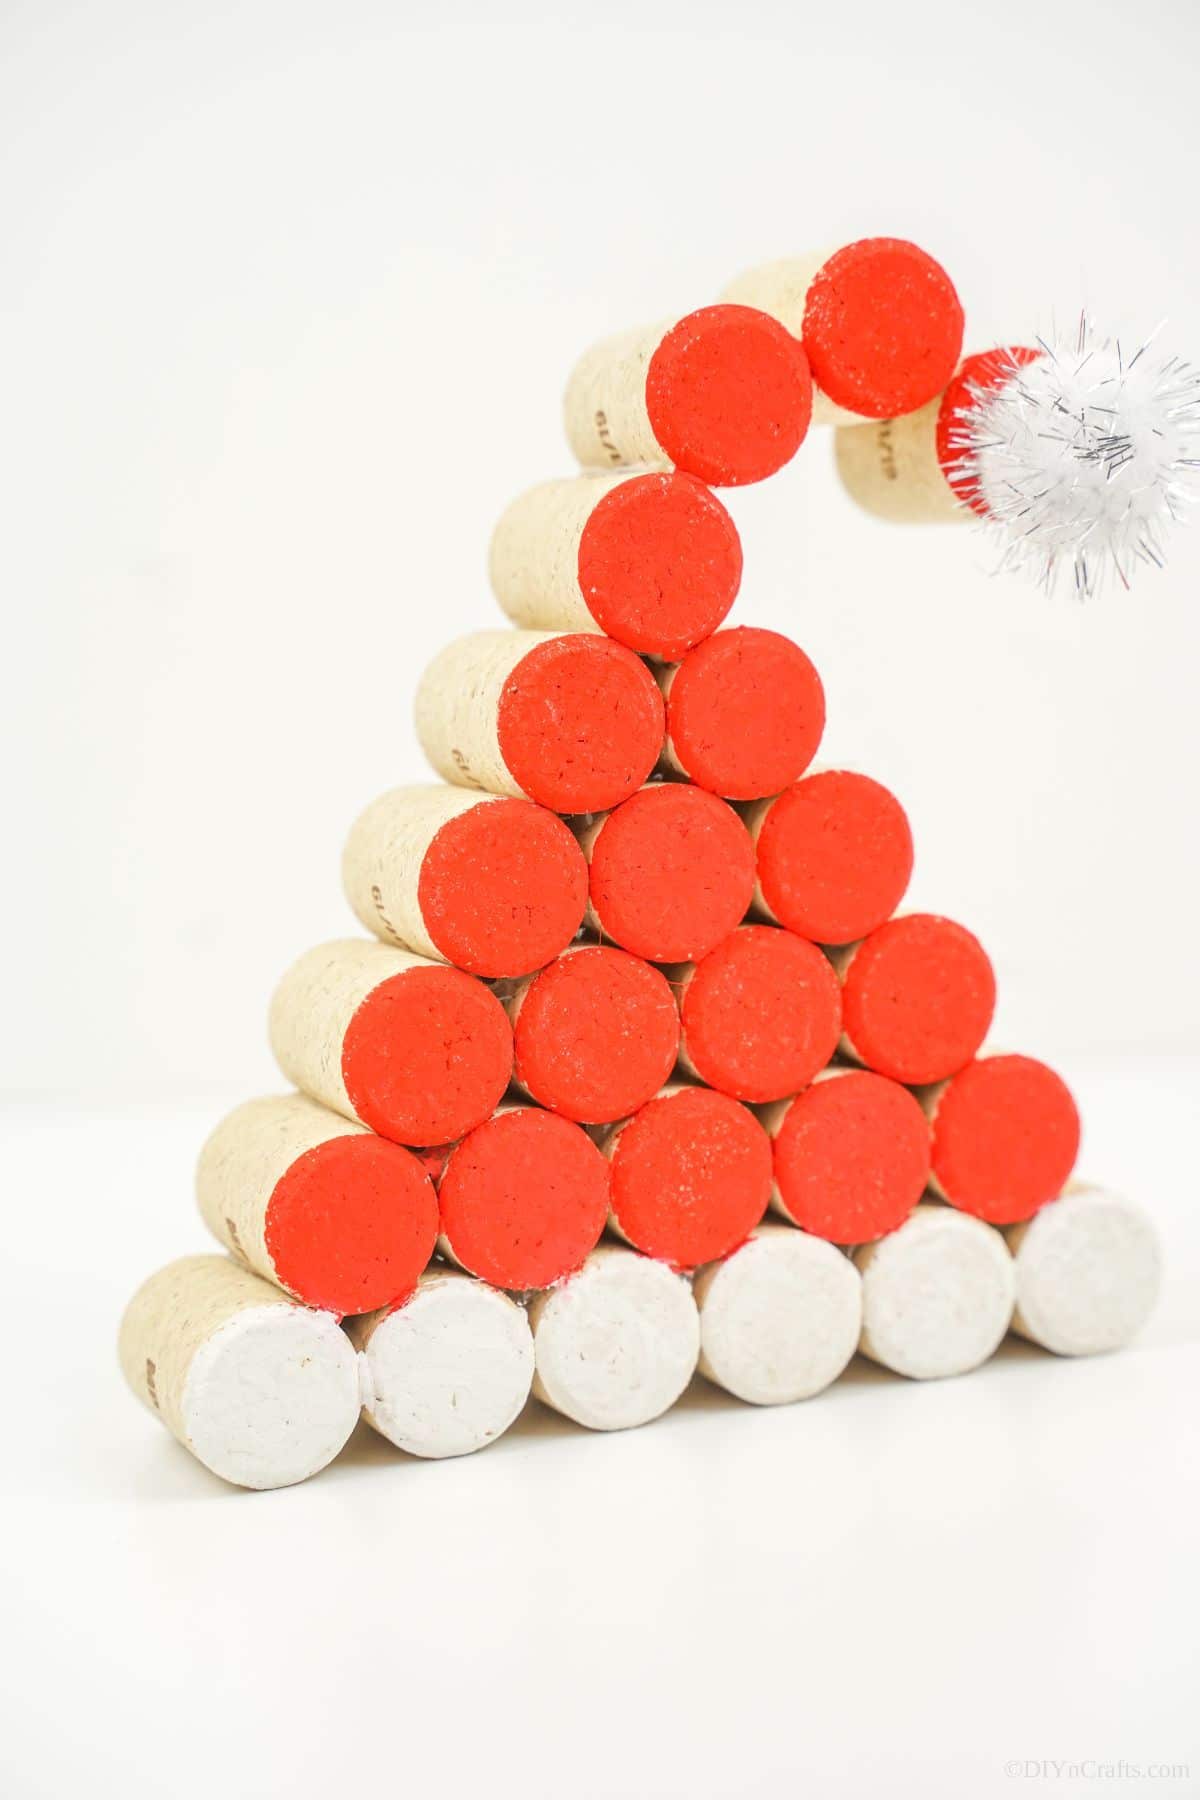 Wine cork painted santa claus hat on white table